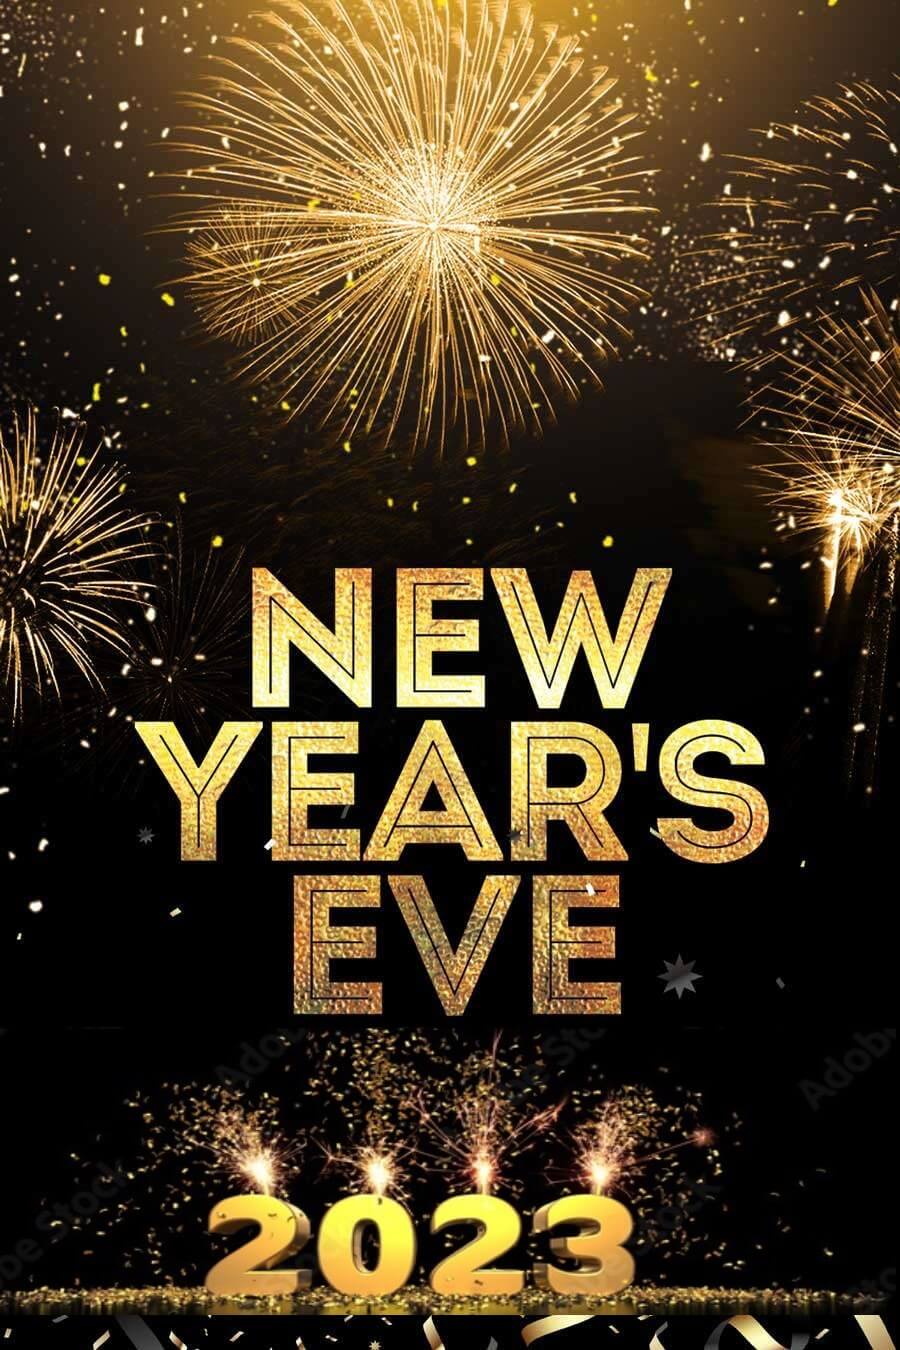 NEW YEARS EVE - 31 December 2022